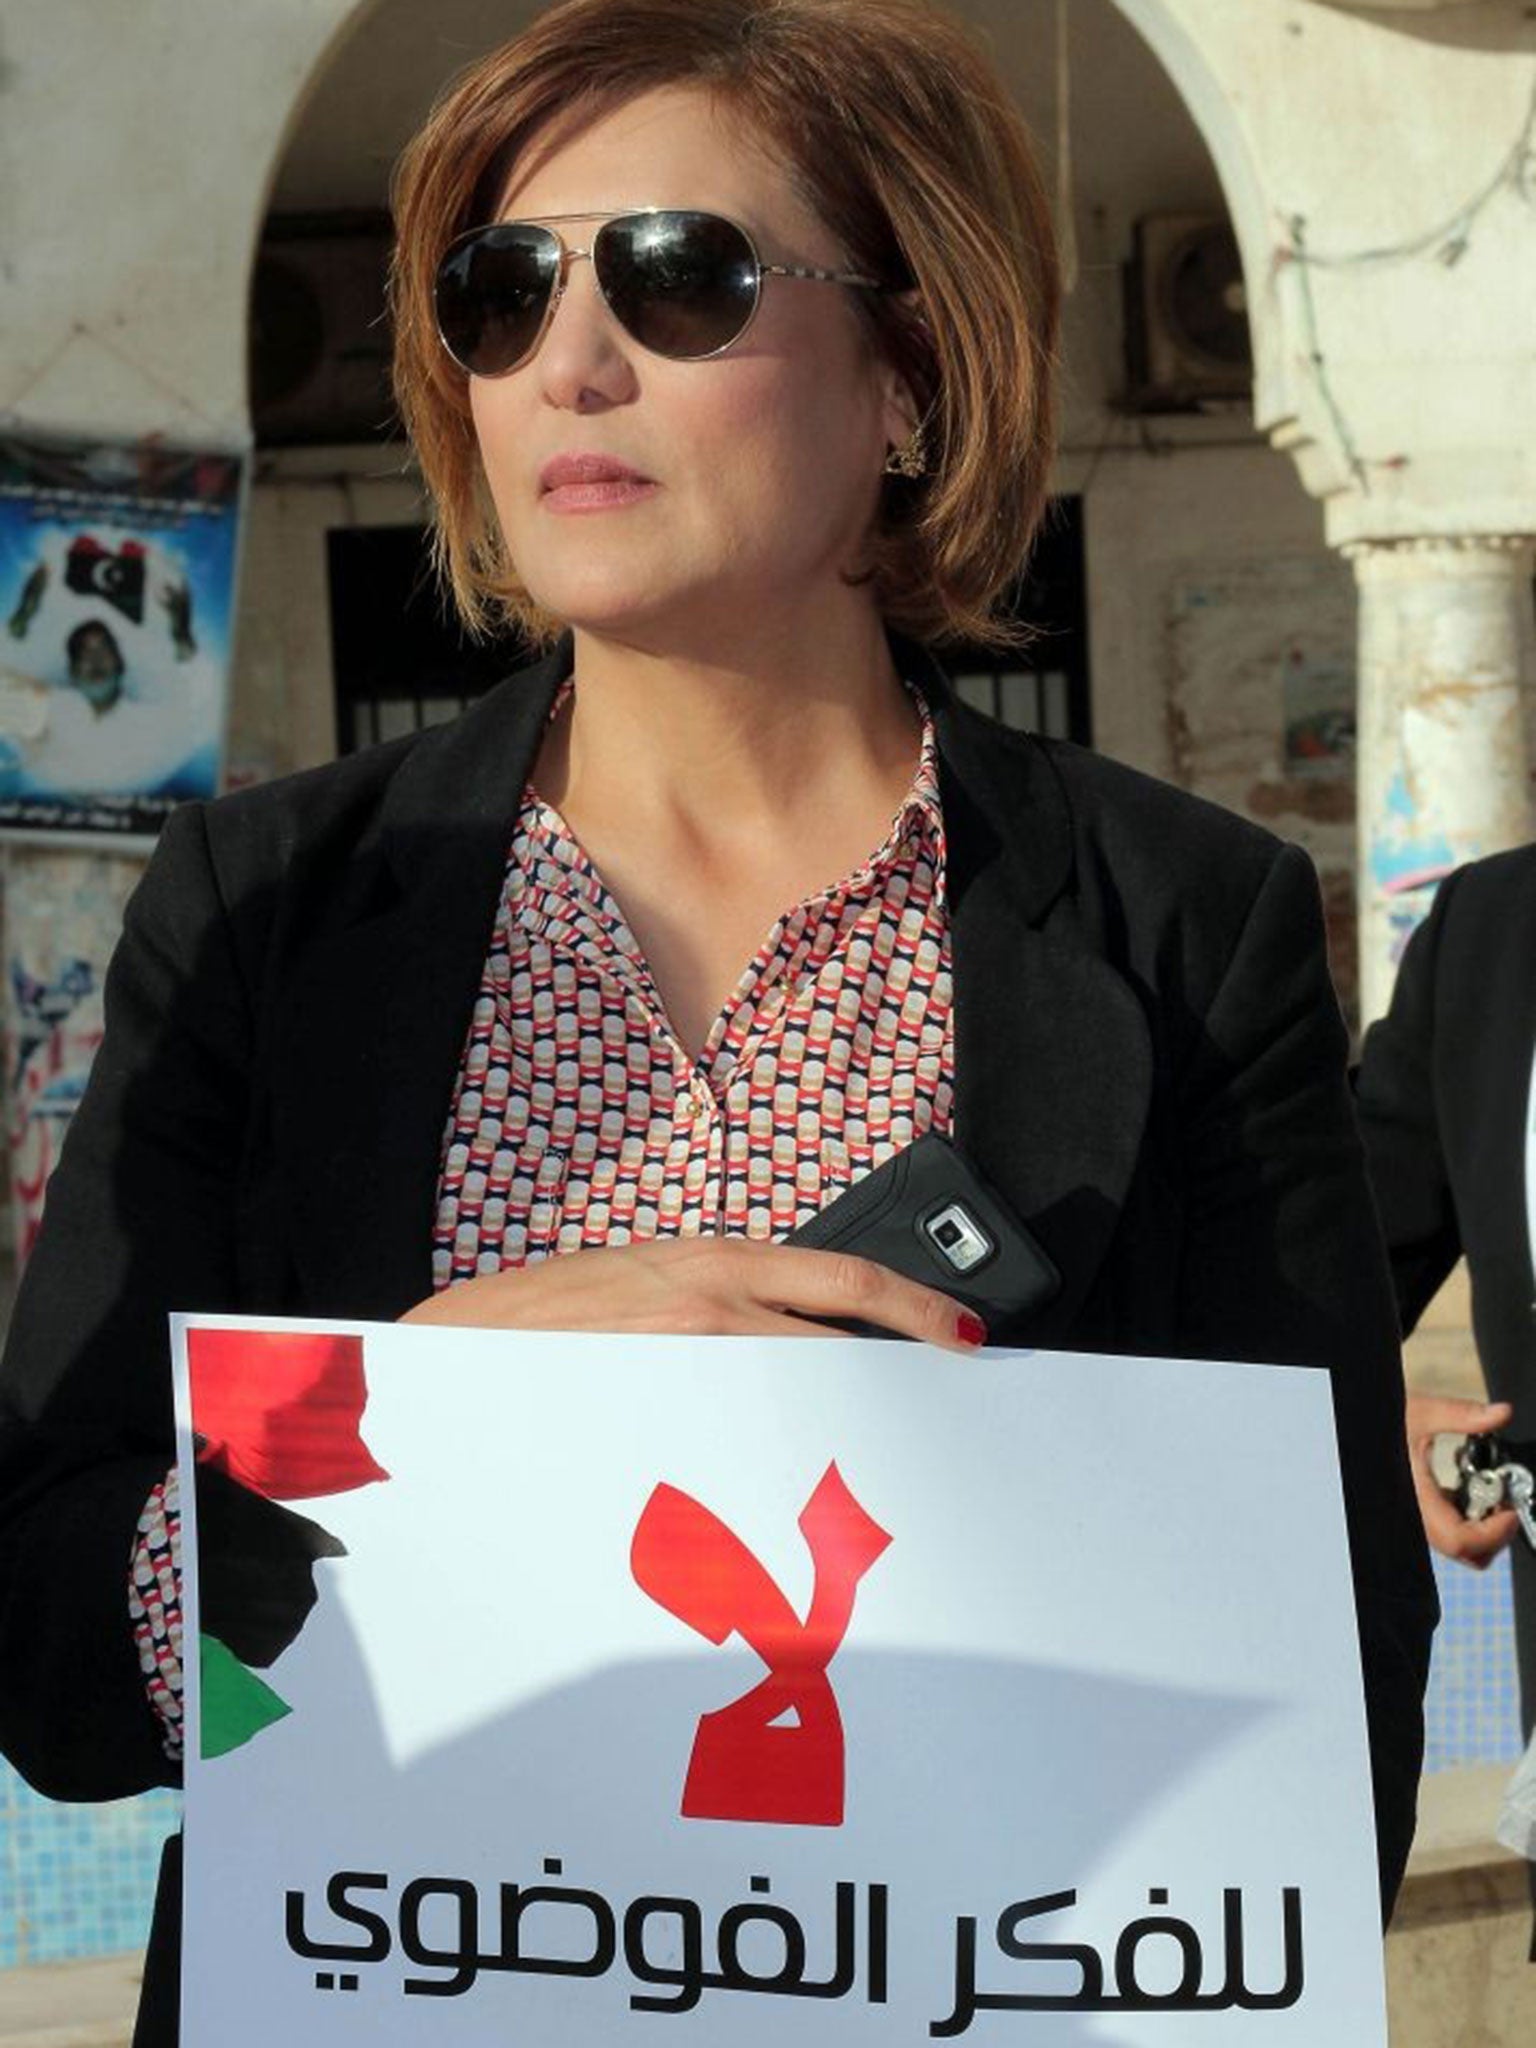 Salwa Bugaighis, a lawyer who took part in Libya’s 2011 revolution, was shot dead at her home in Benghazi